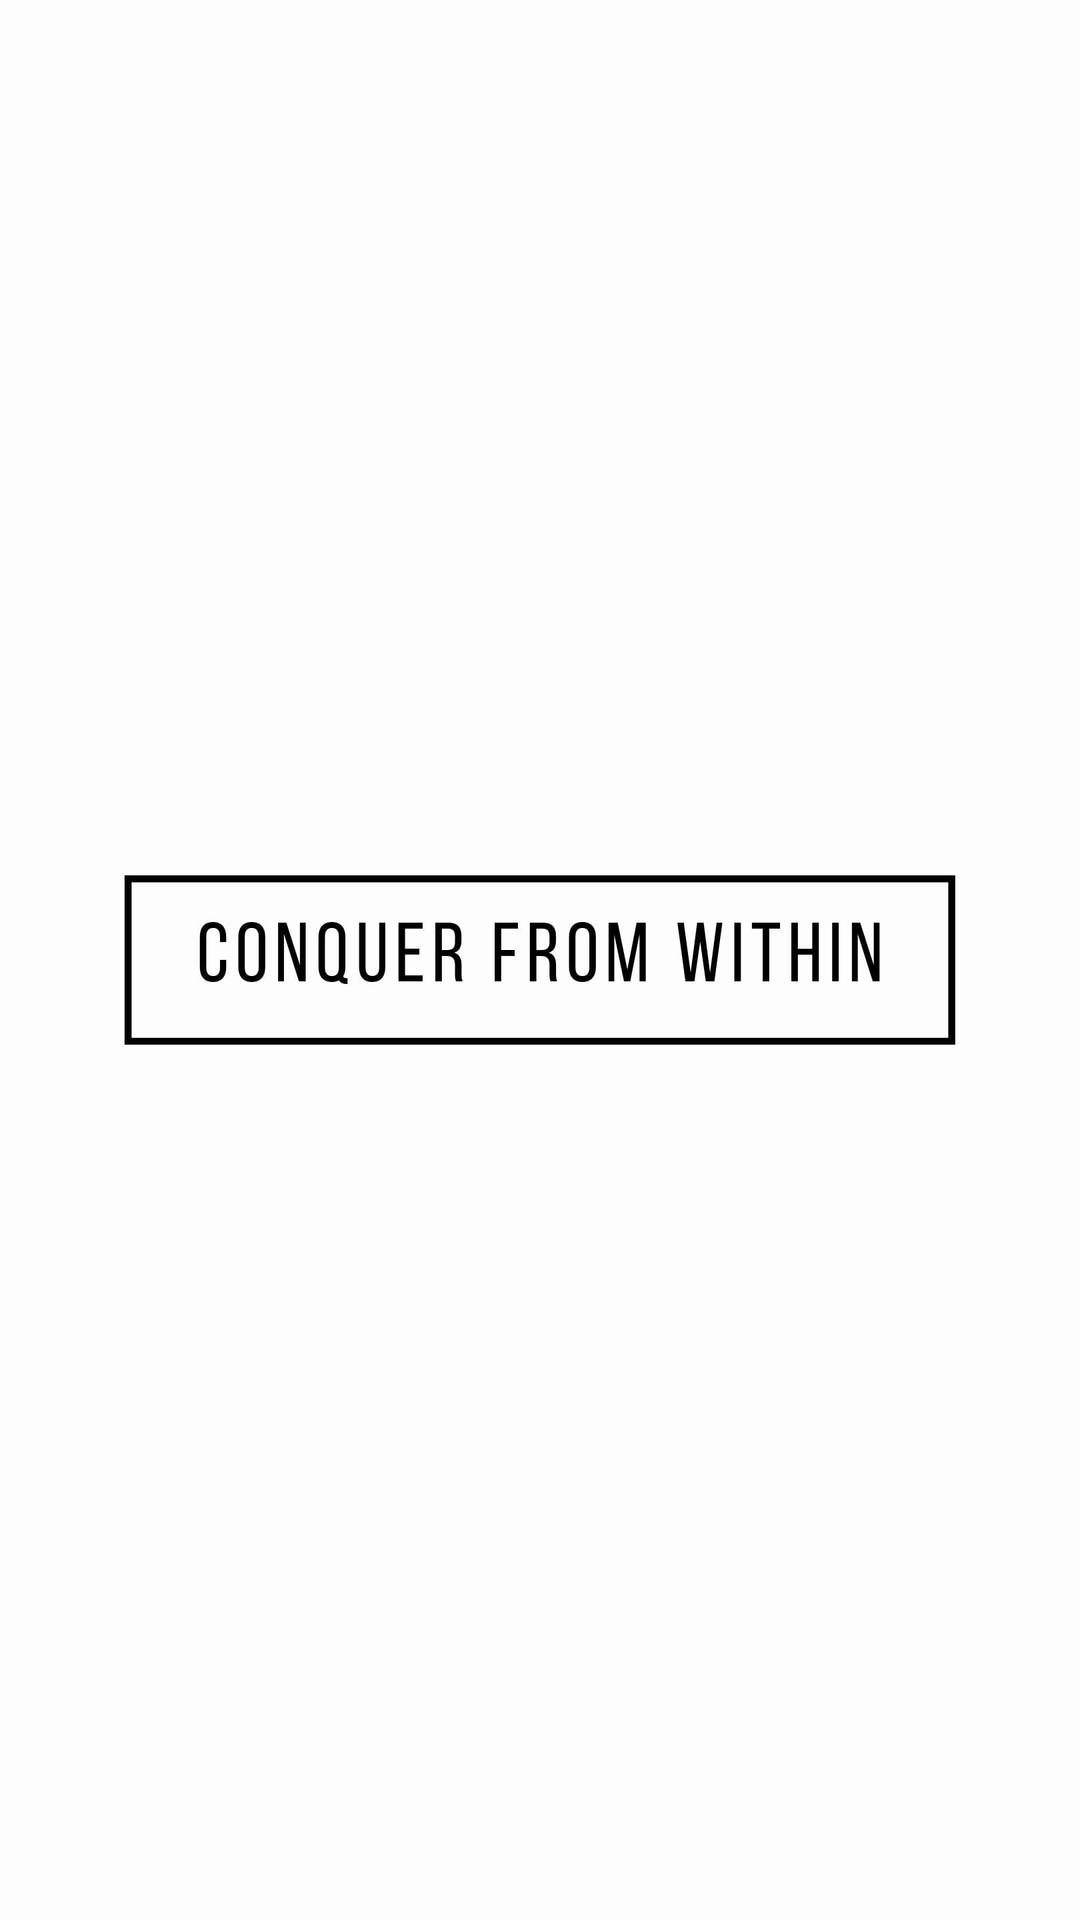 "Conquer from Within - Minimalist Motivational Wallpaper" Wallpaper